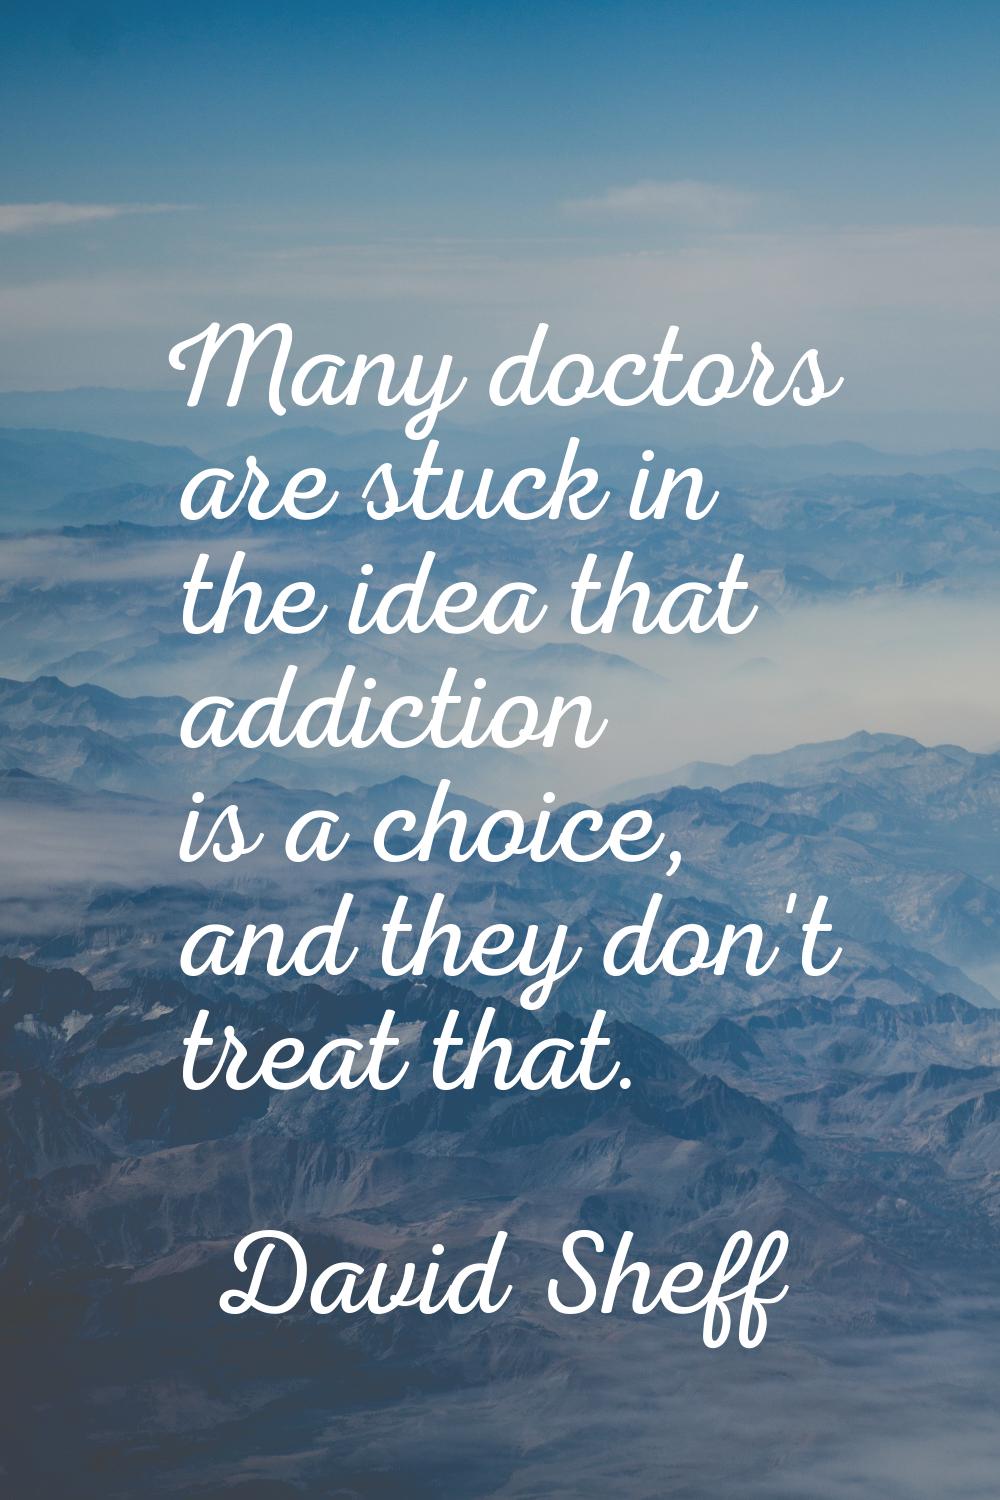 Many doctors are stuck in the idea that addiction is a choice, and they don't treat that.